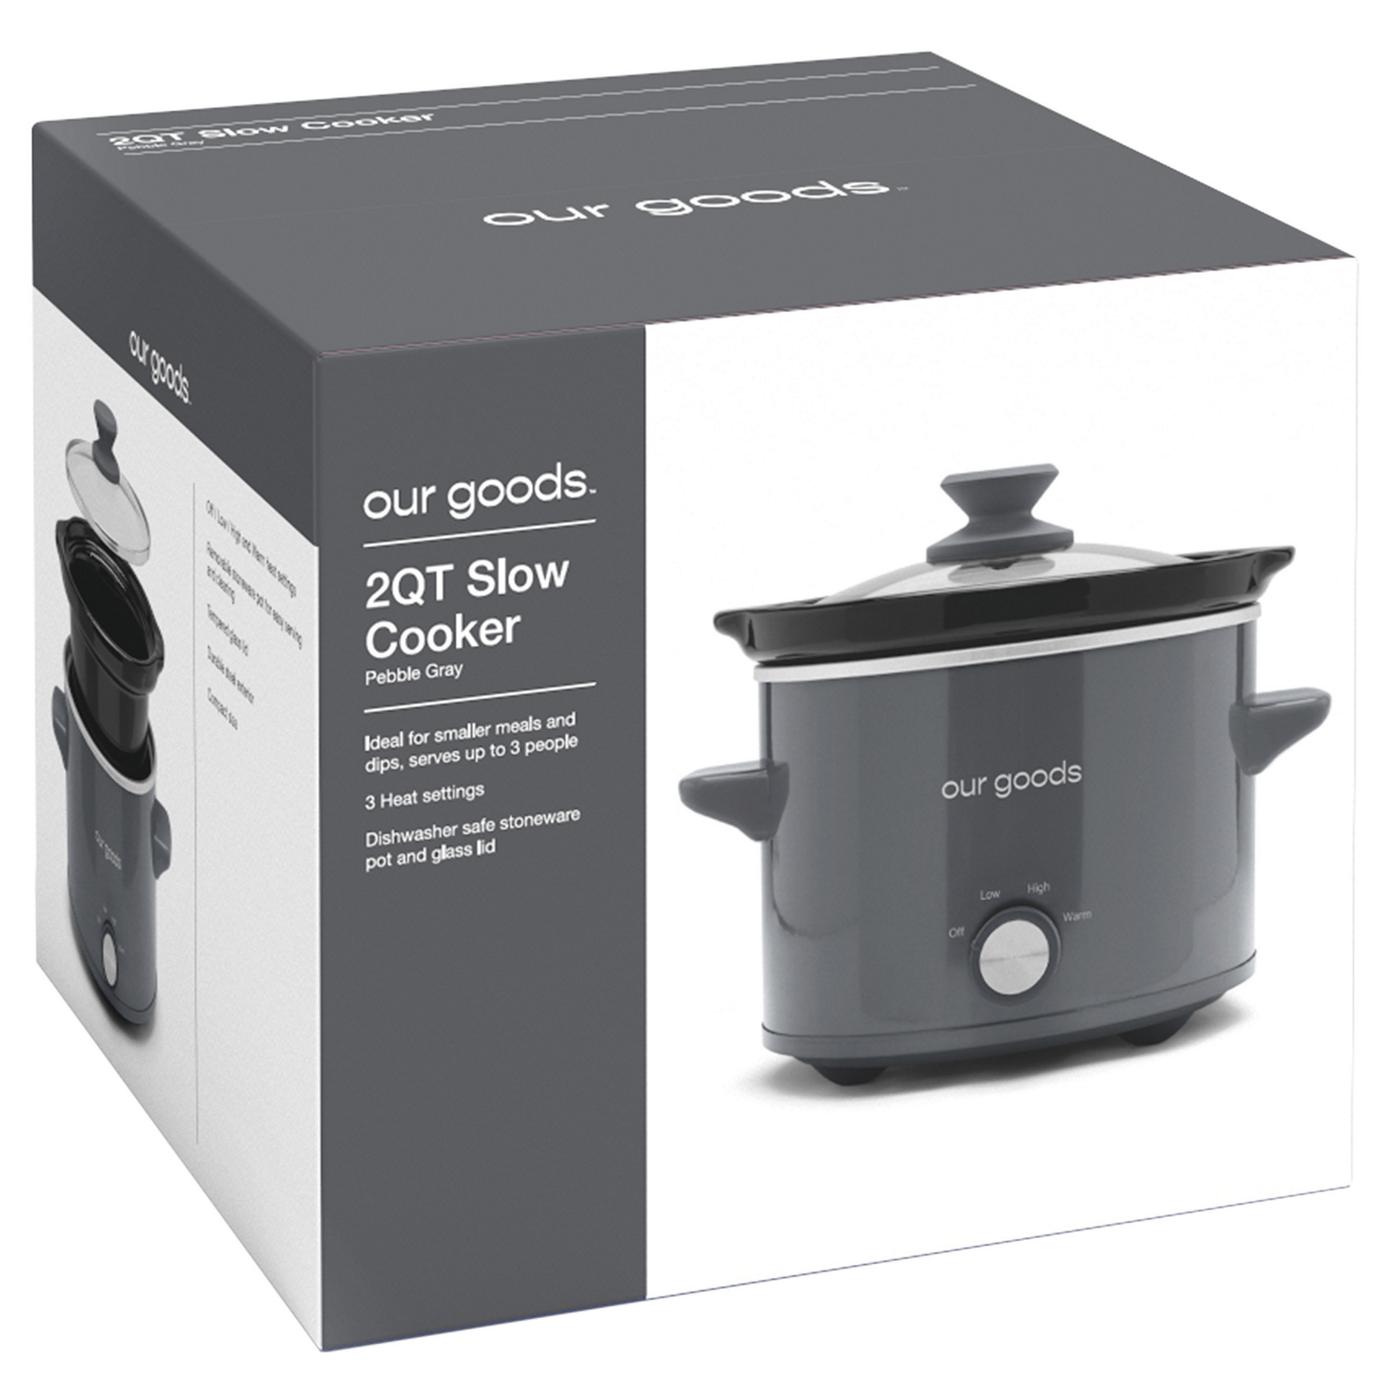 Need a New Crockpot? This Hearth & Hand Crockpot is less than $14!